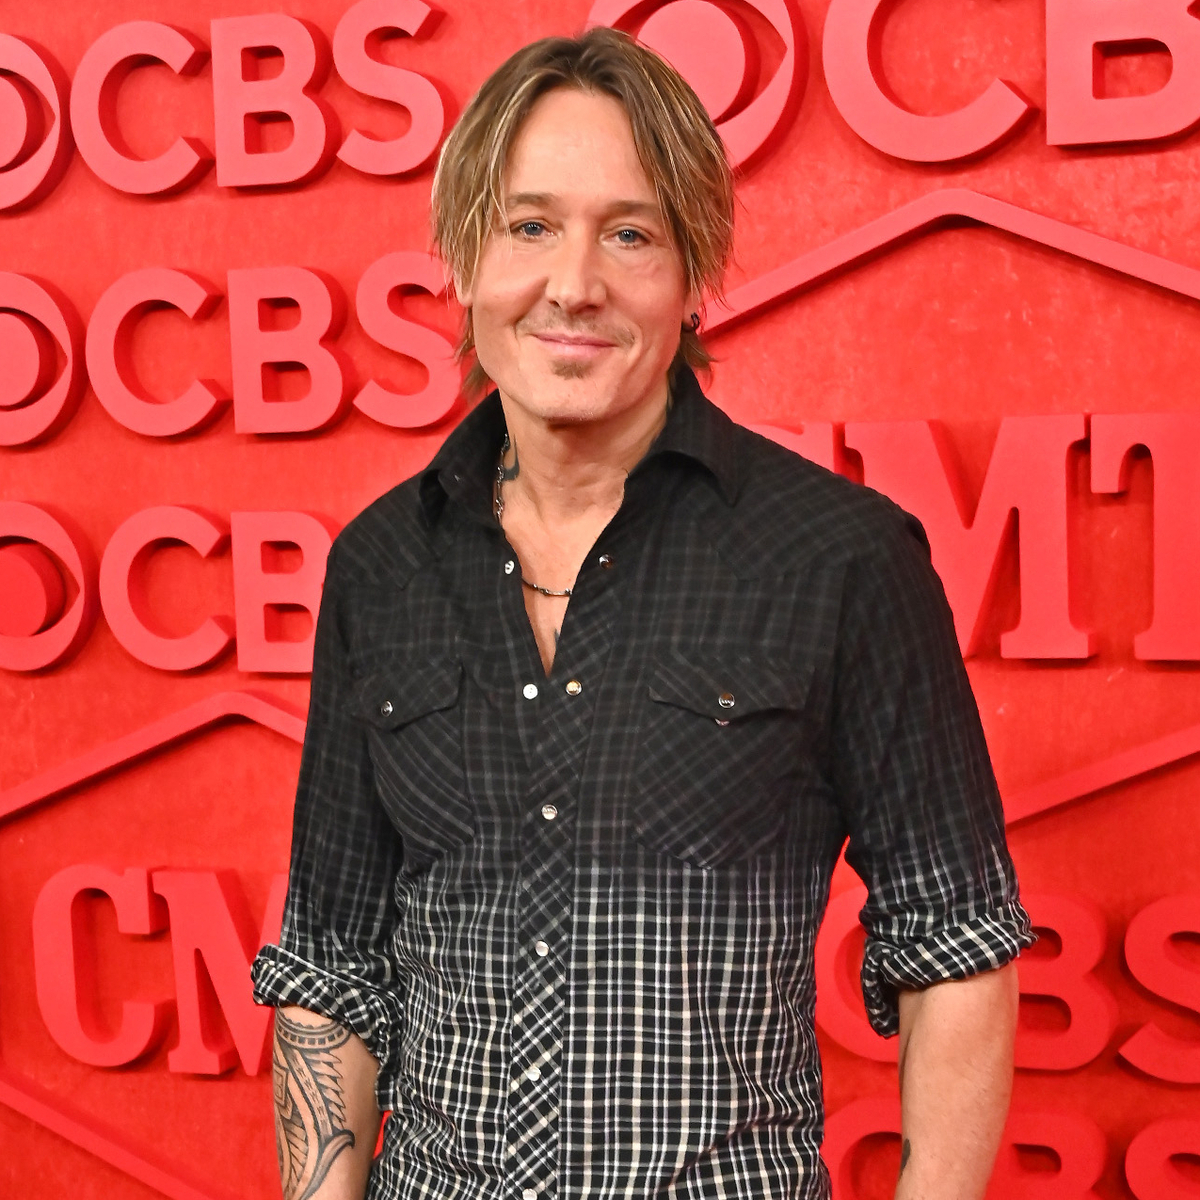 What Is Keith Urban’s Top Marriage Advice After 17 Years With Nicole Kidman? He Says…